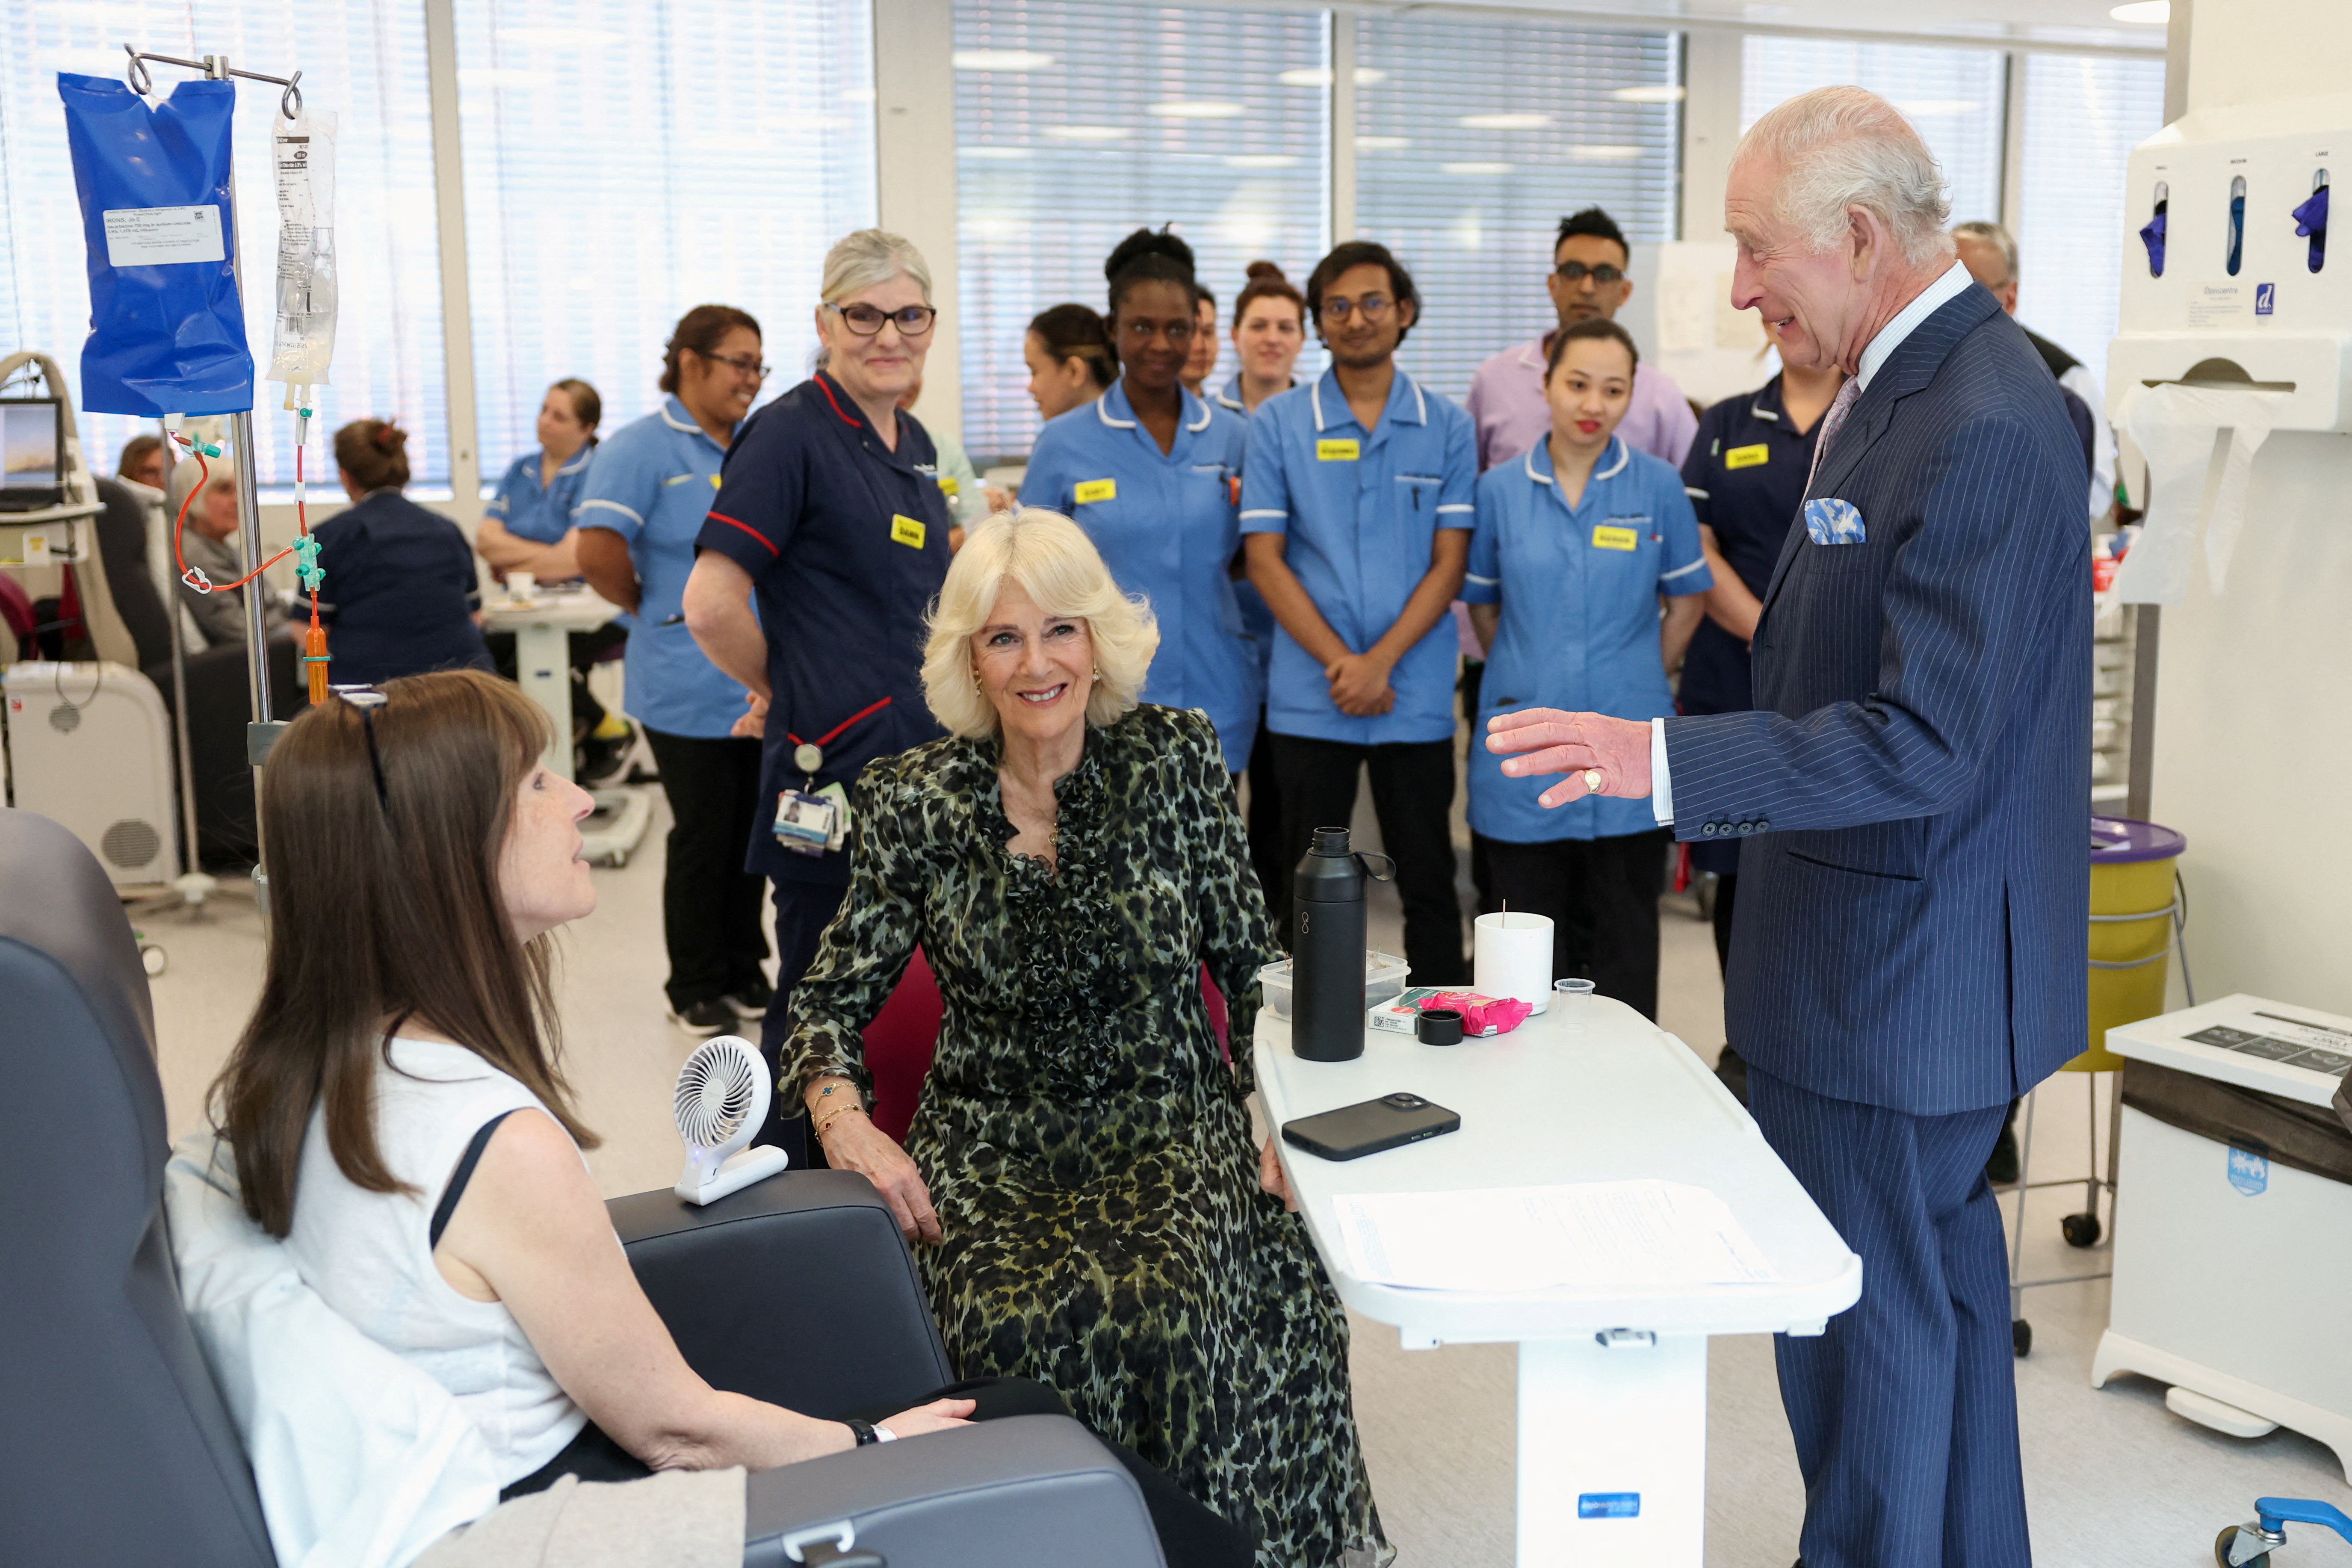 The King met with fellow cancer patients on his first public engagement in months